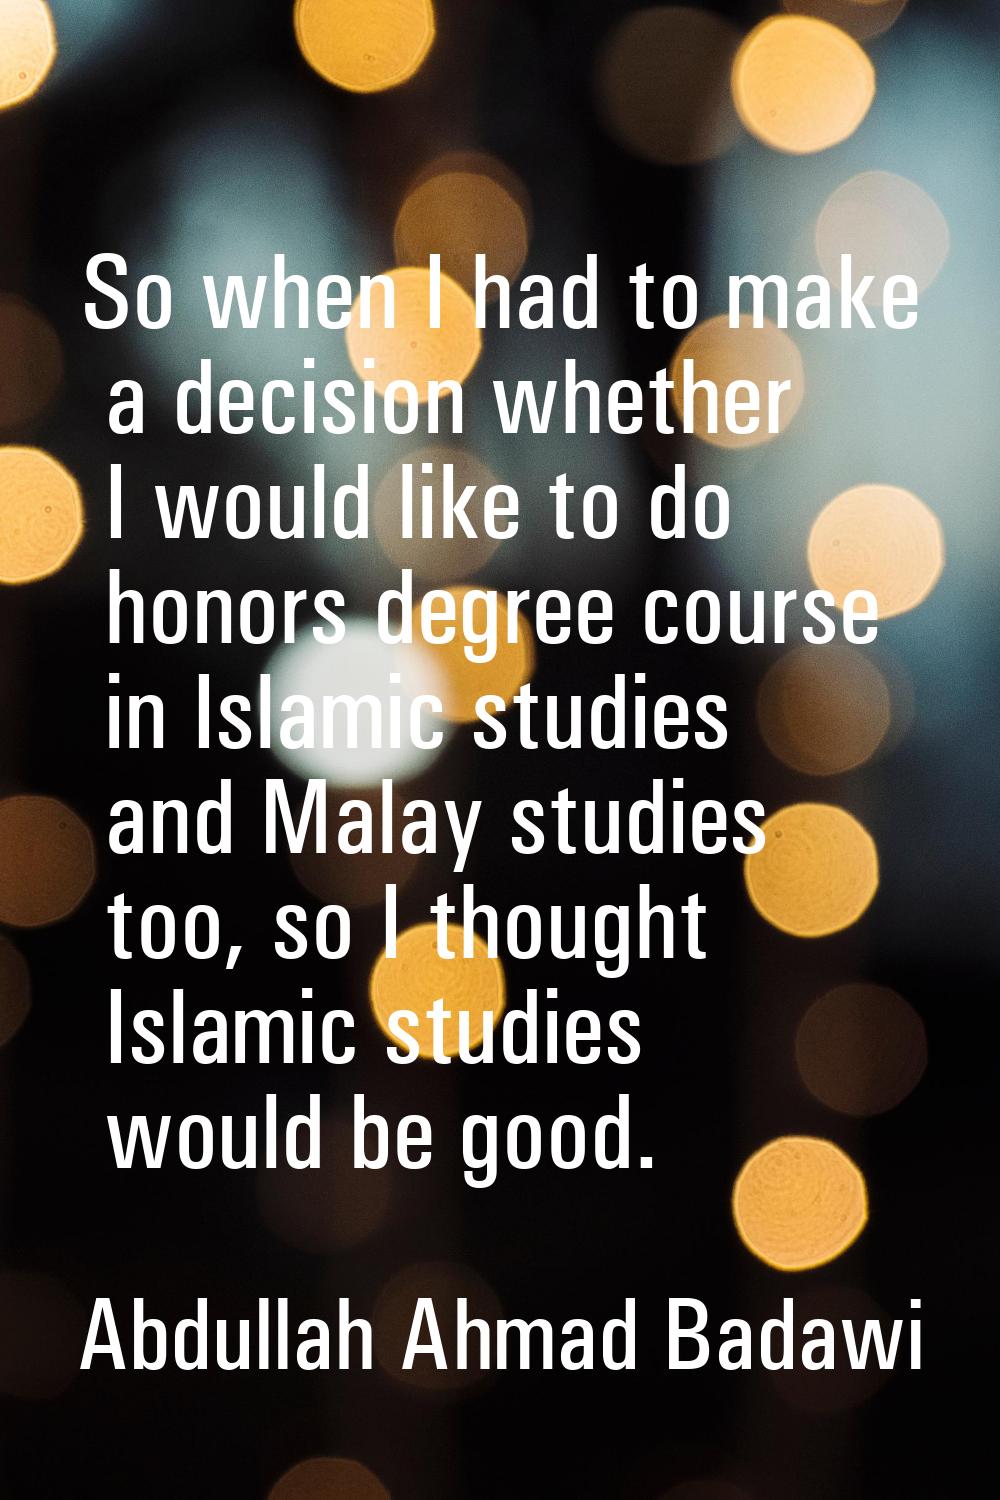 So when I had to make a decision whether I would like to do honors degree course in Islamic studies